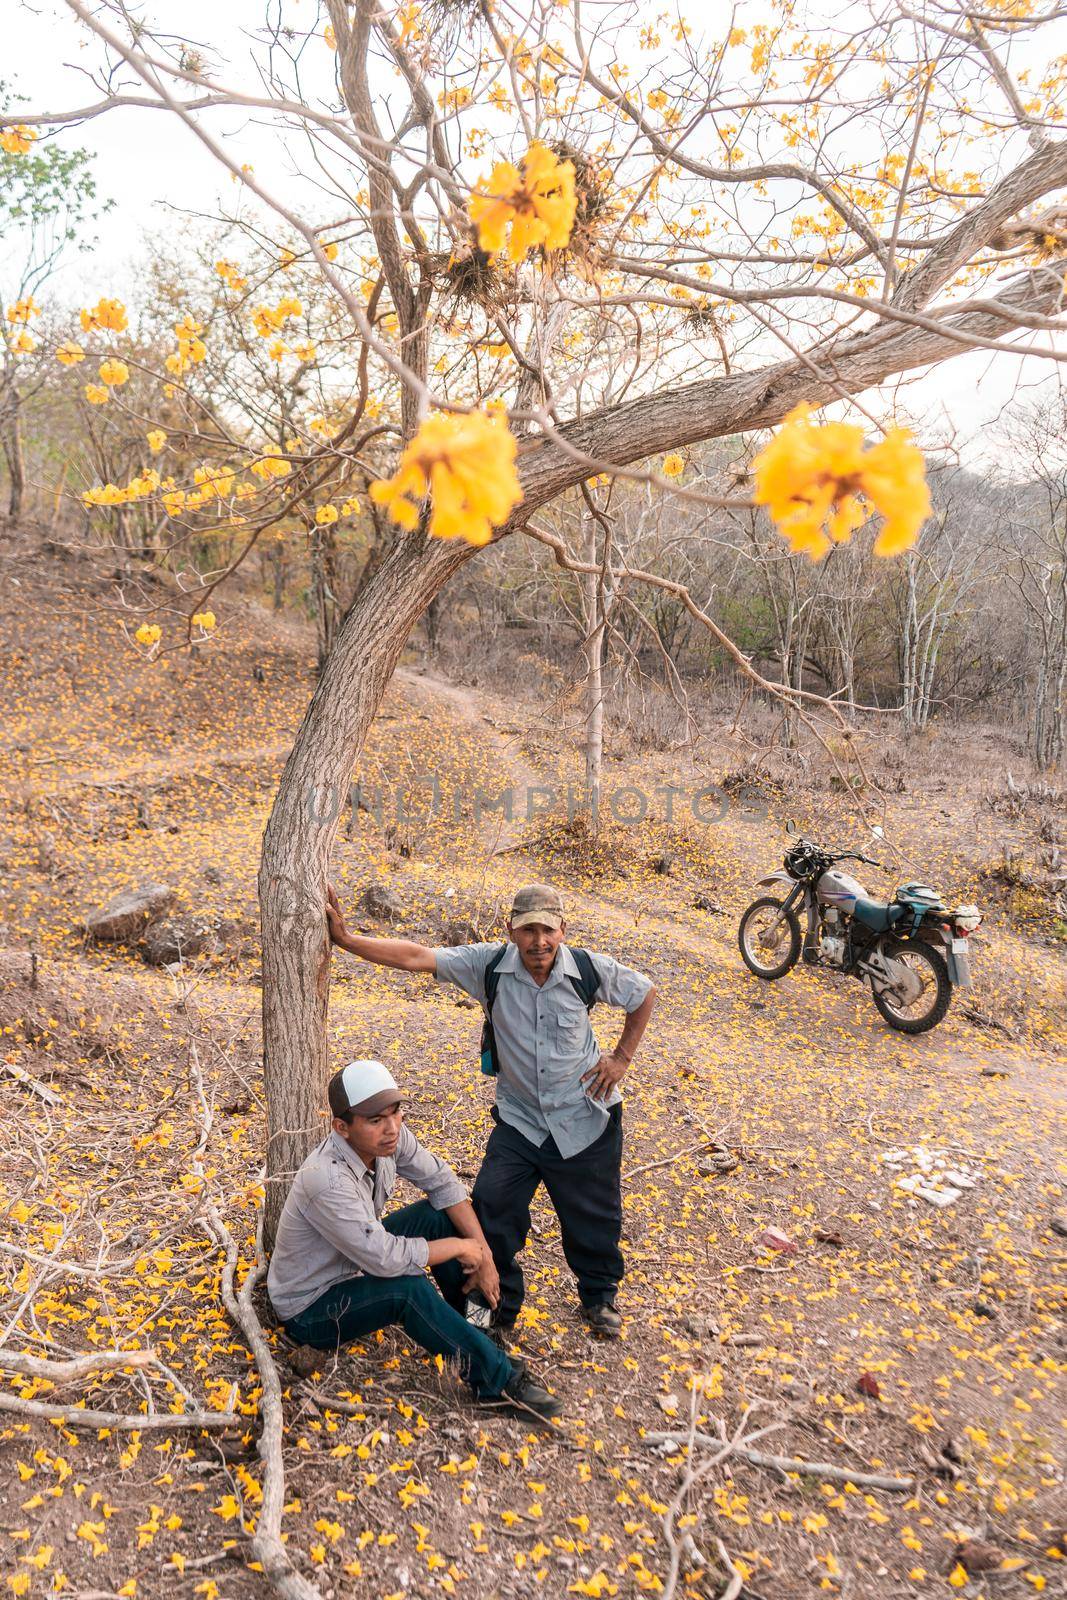 Peasant father and son under a Cortez tree with yellow flowers and a motorcycle next to them by cfalvarez